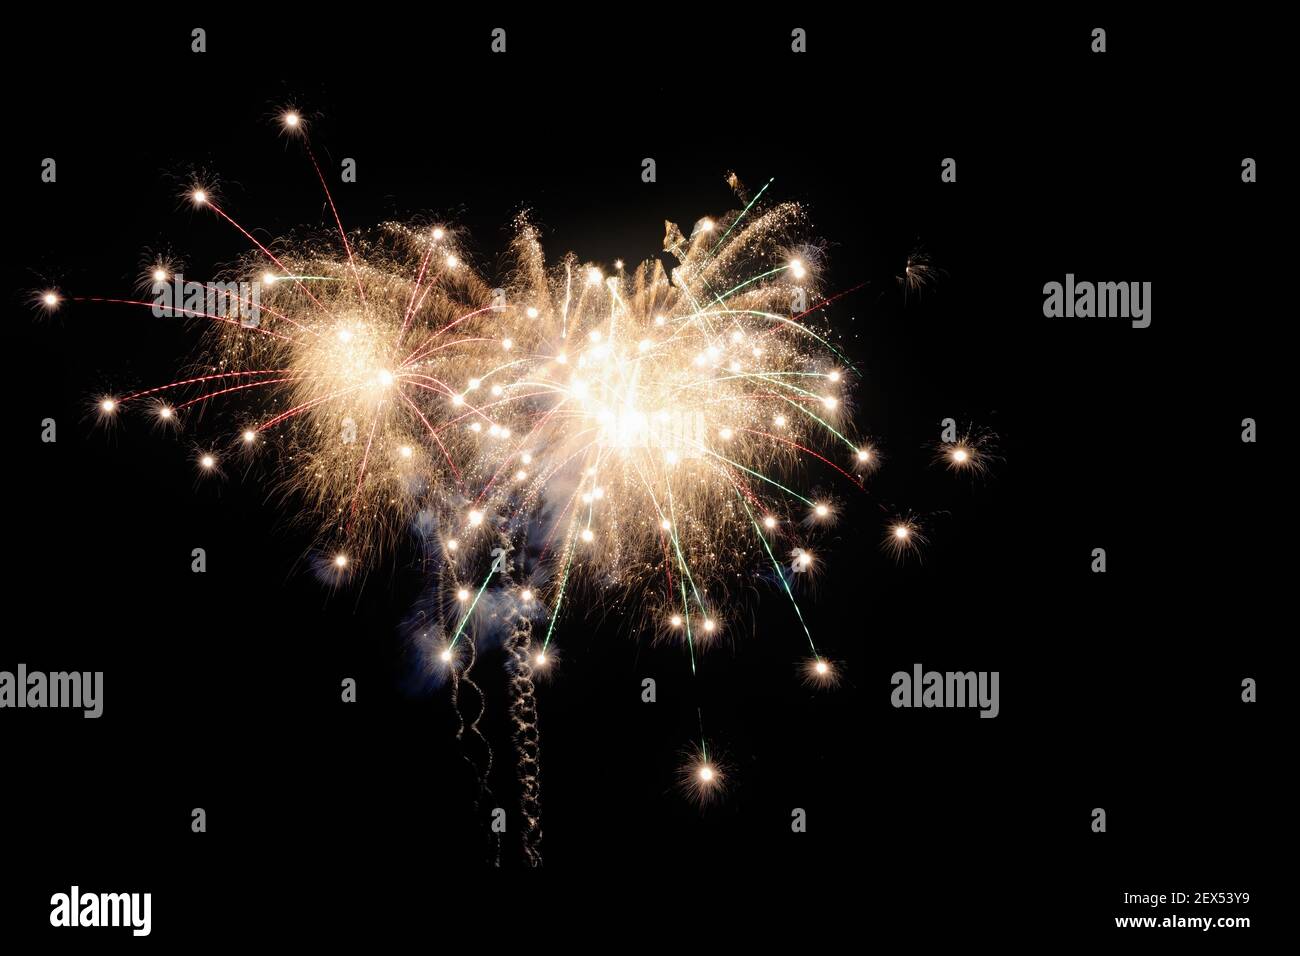 Image with a black background prepared to edit text of a firework, formed by a star with several branches of raw white color accompanied by red and gr Stock Photo